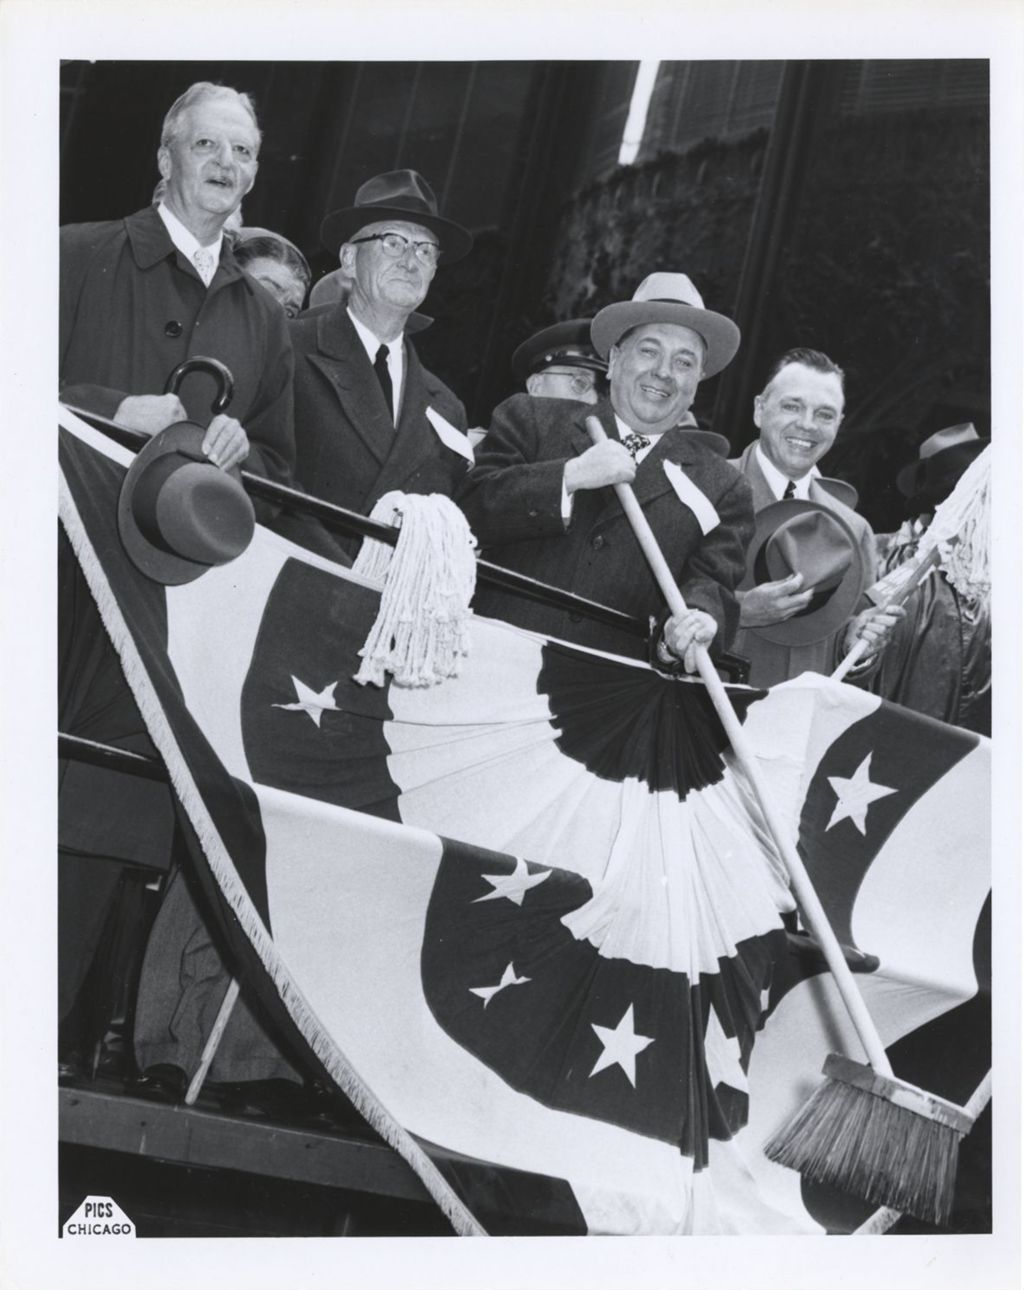 Miniature of Richard J. Daley with broom on parade viewing stand